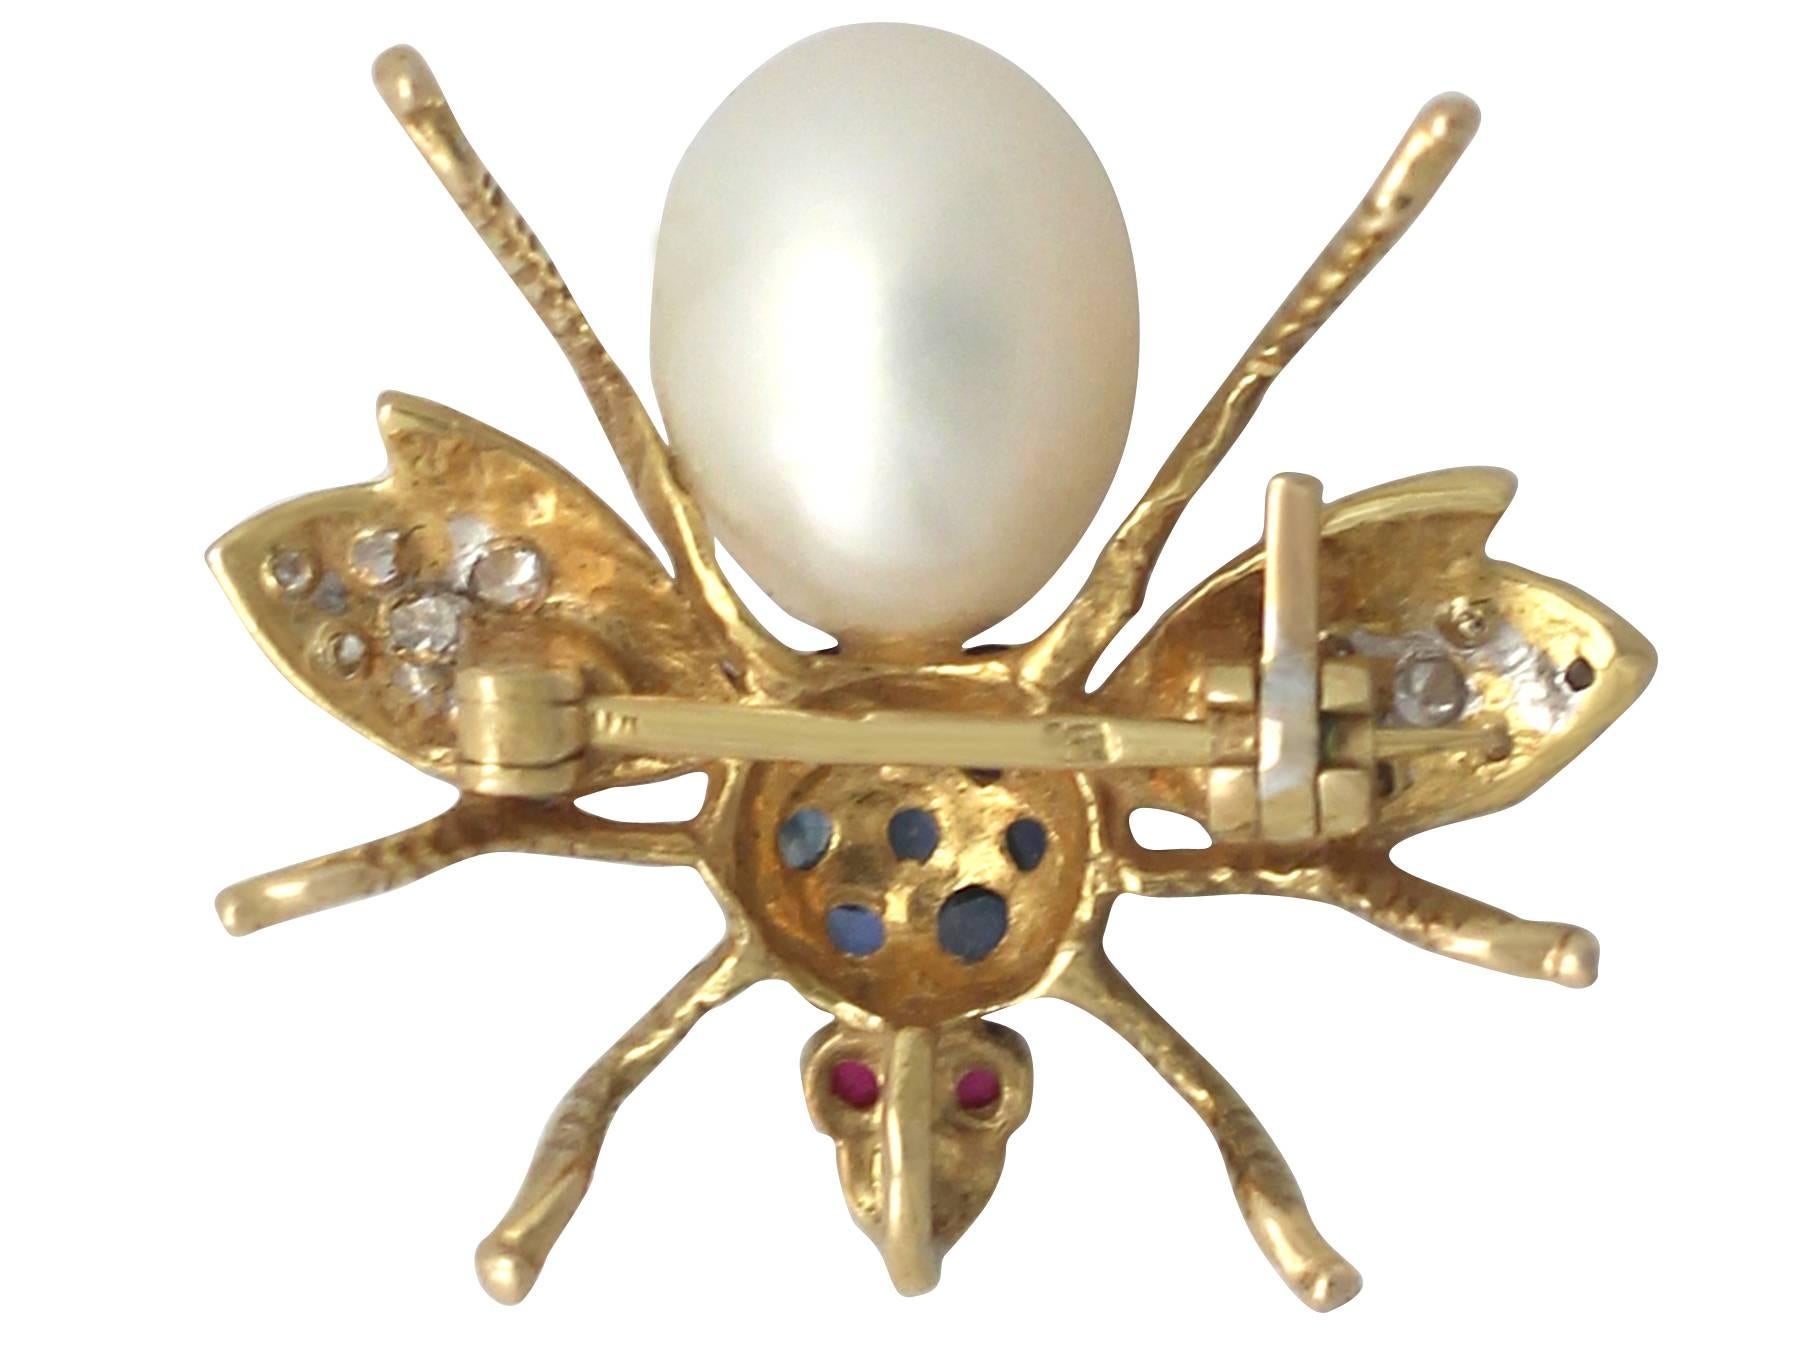 0.14Ct Diamond, Pearl, Sapphire & Ruby, 18k Yellow Gold Insect Brooch - Vintage 2